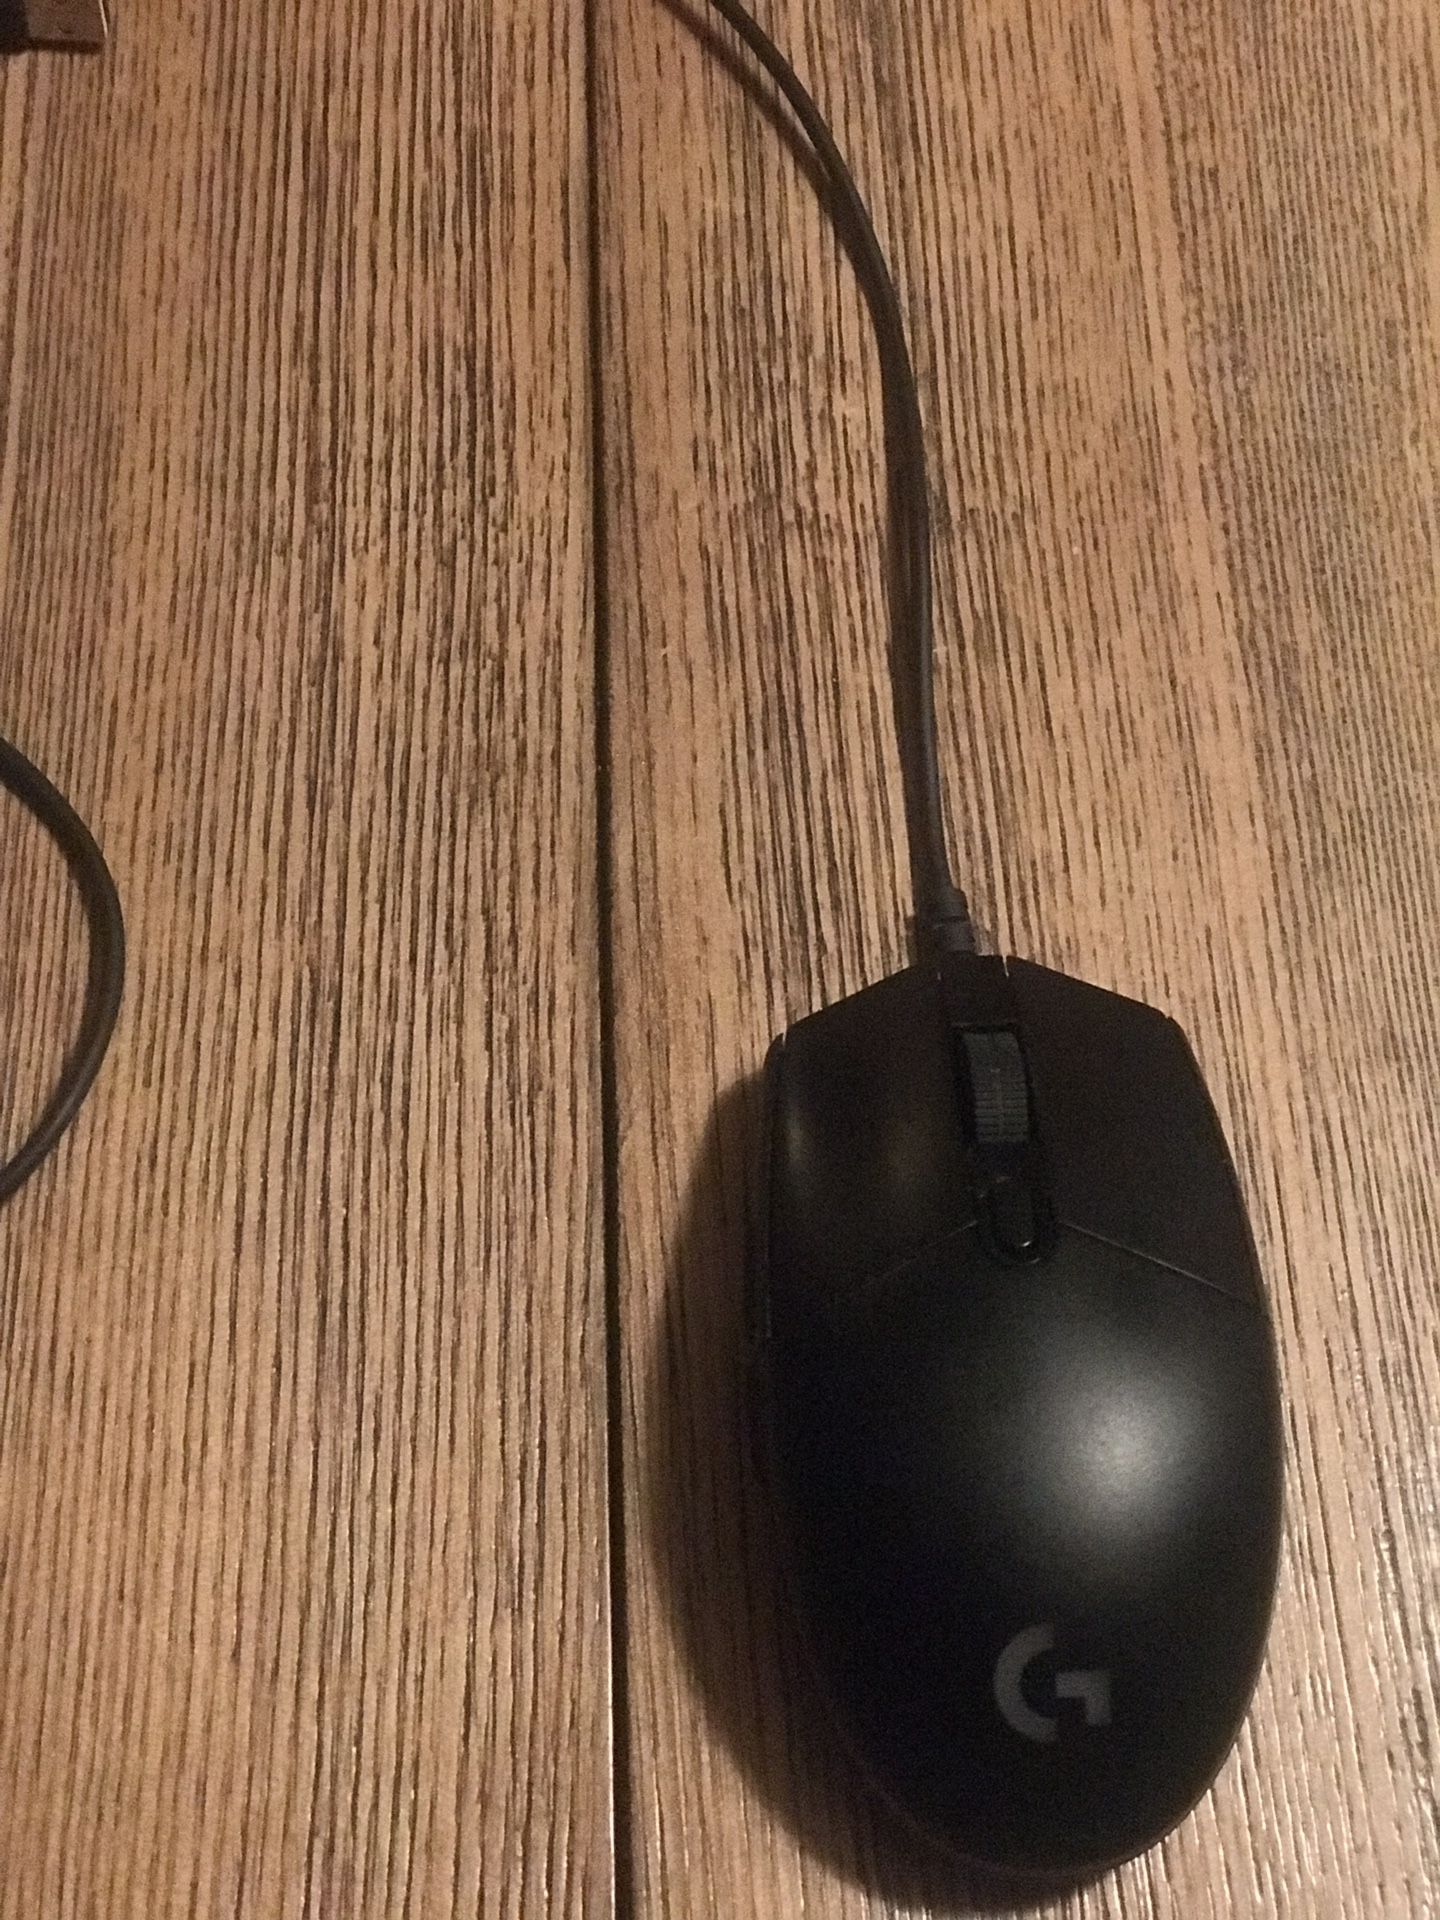 Logitech G203 (Pro) gaming mouse